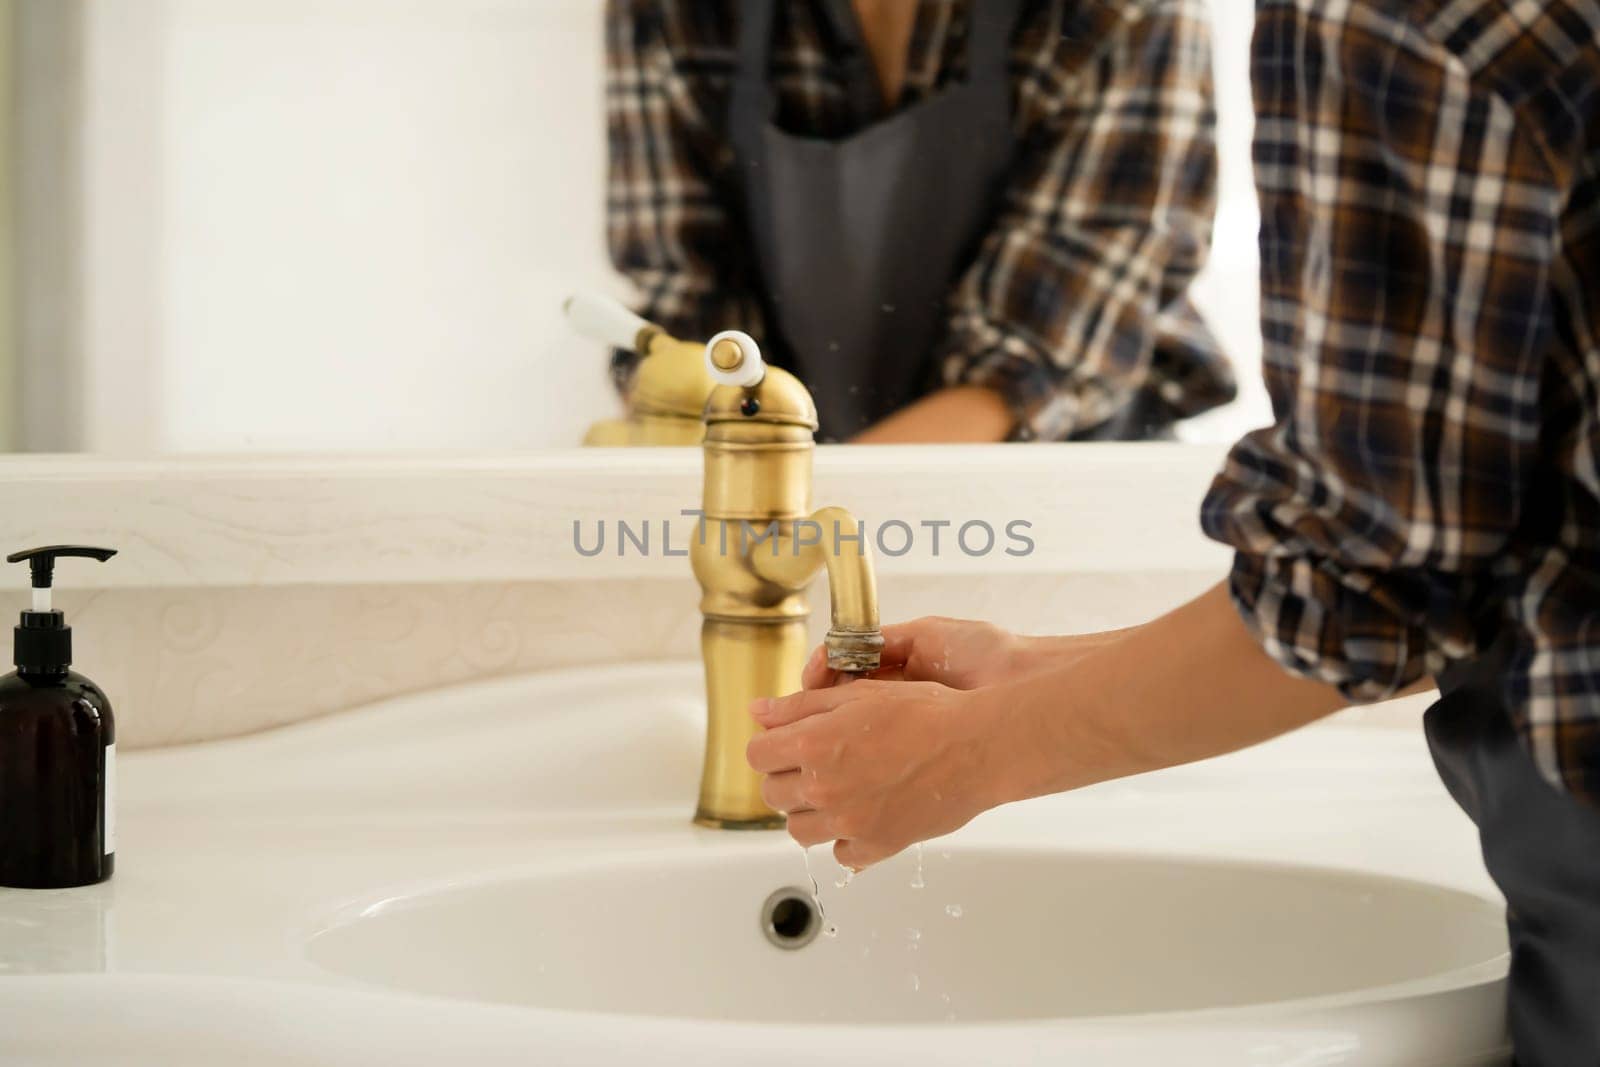 The girl creates cleanliness in the bathroom, cleans her spacious comfortable house using detergents, the woman washes her hands with soap near the mirror.